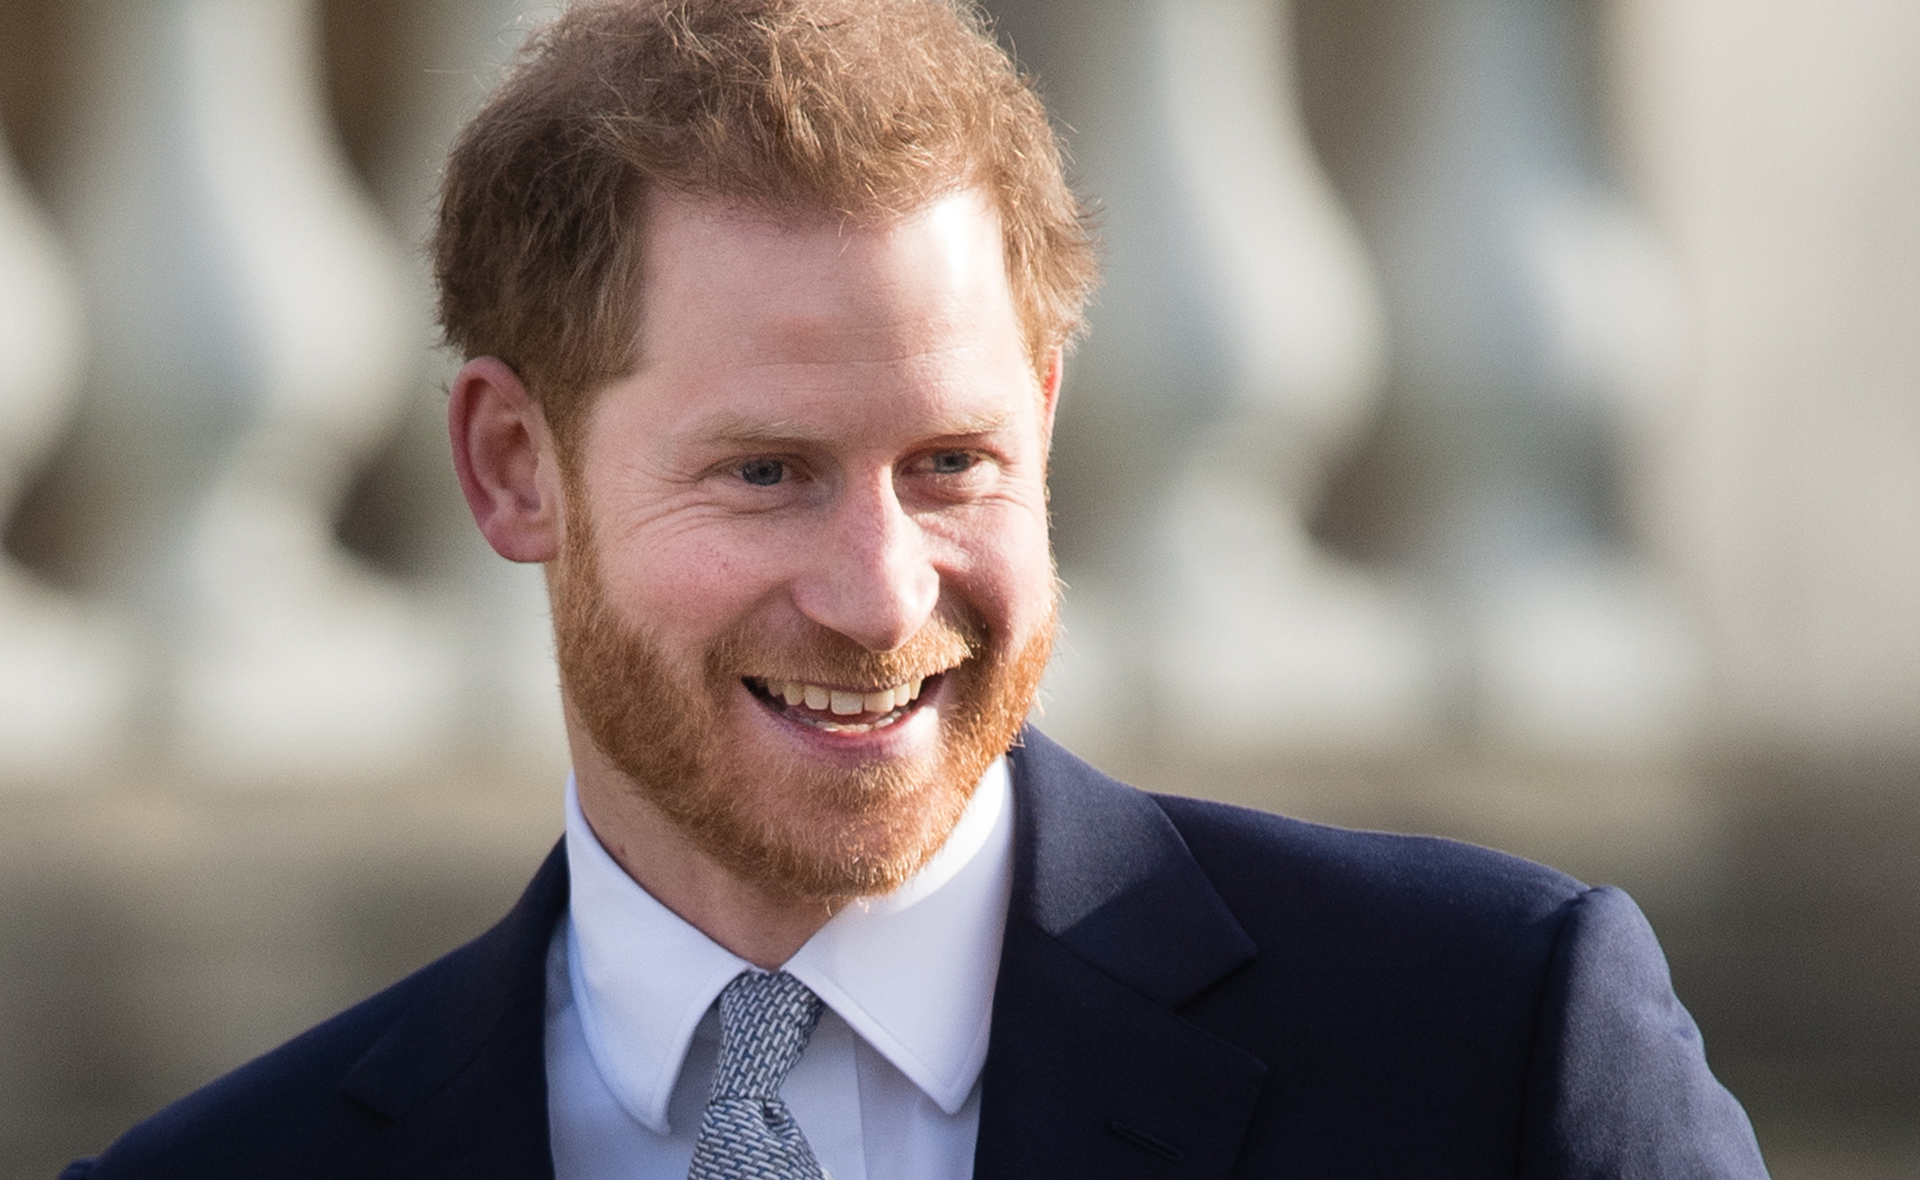 Prince Harry flooded with royal birthday messages from Prince William, Duchess Catherine and more